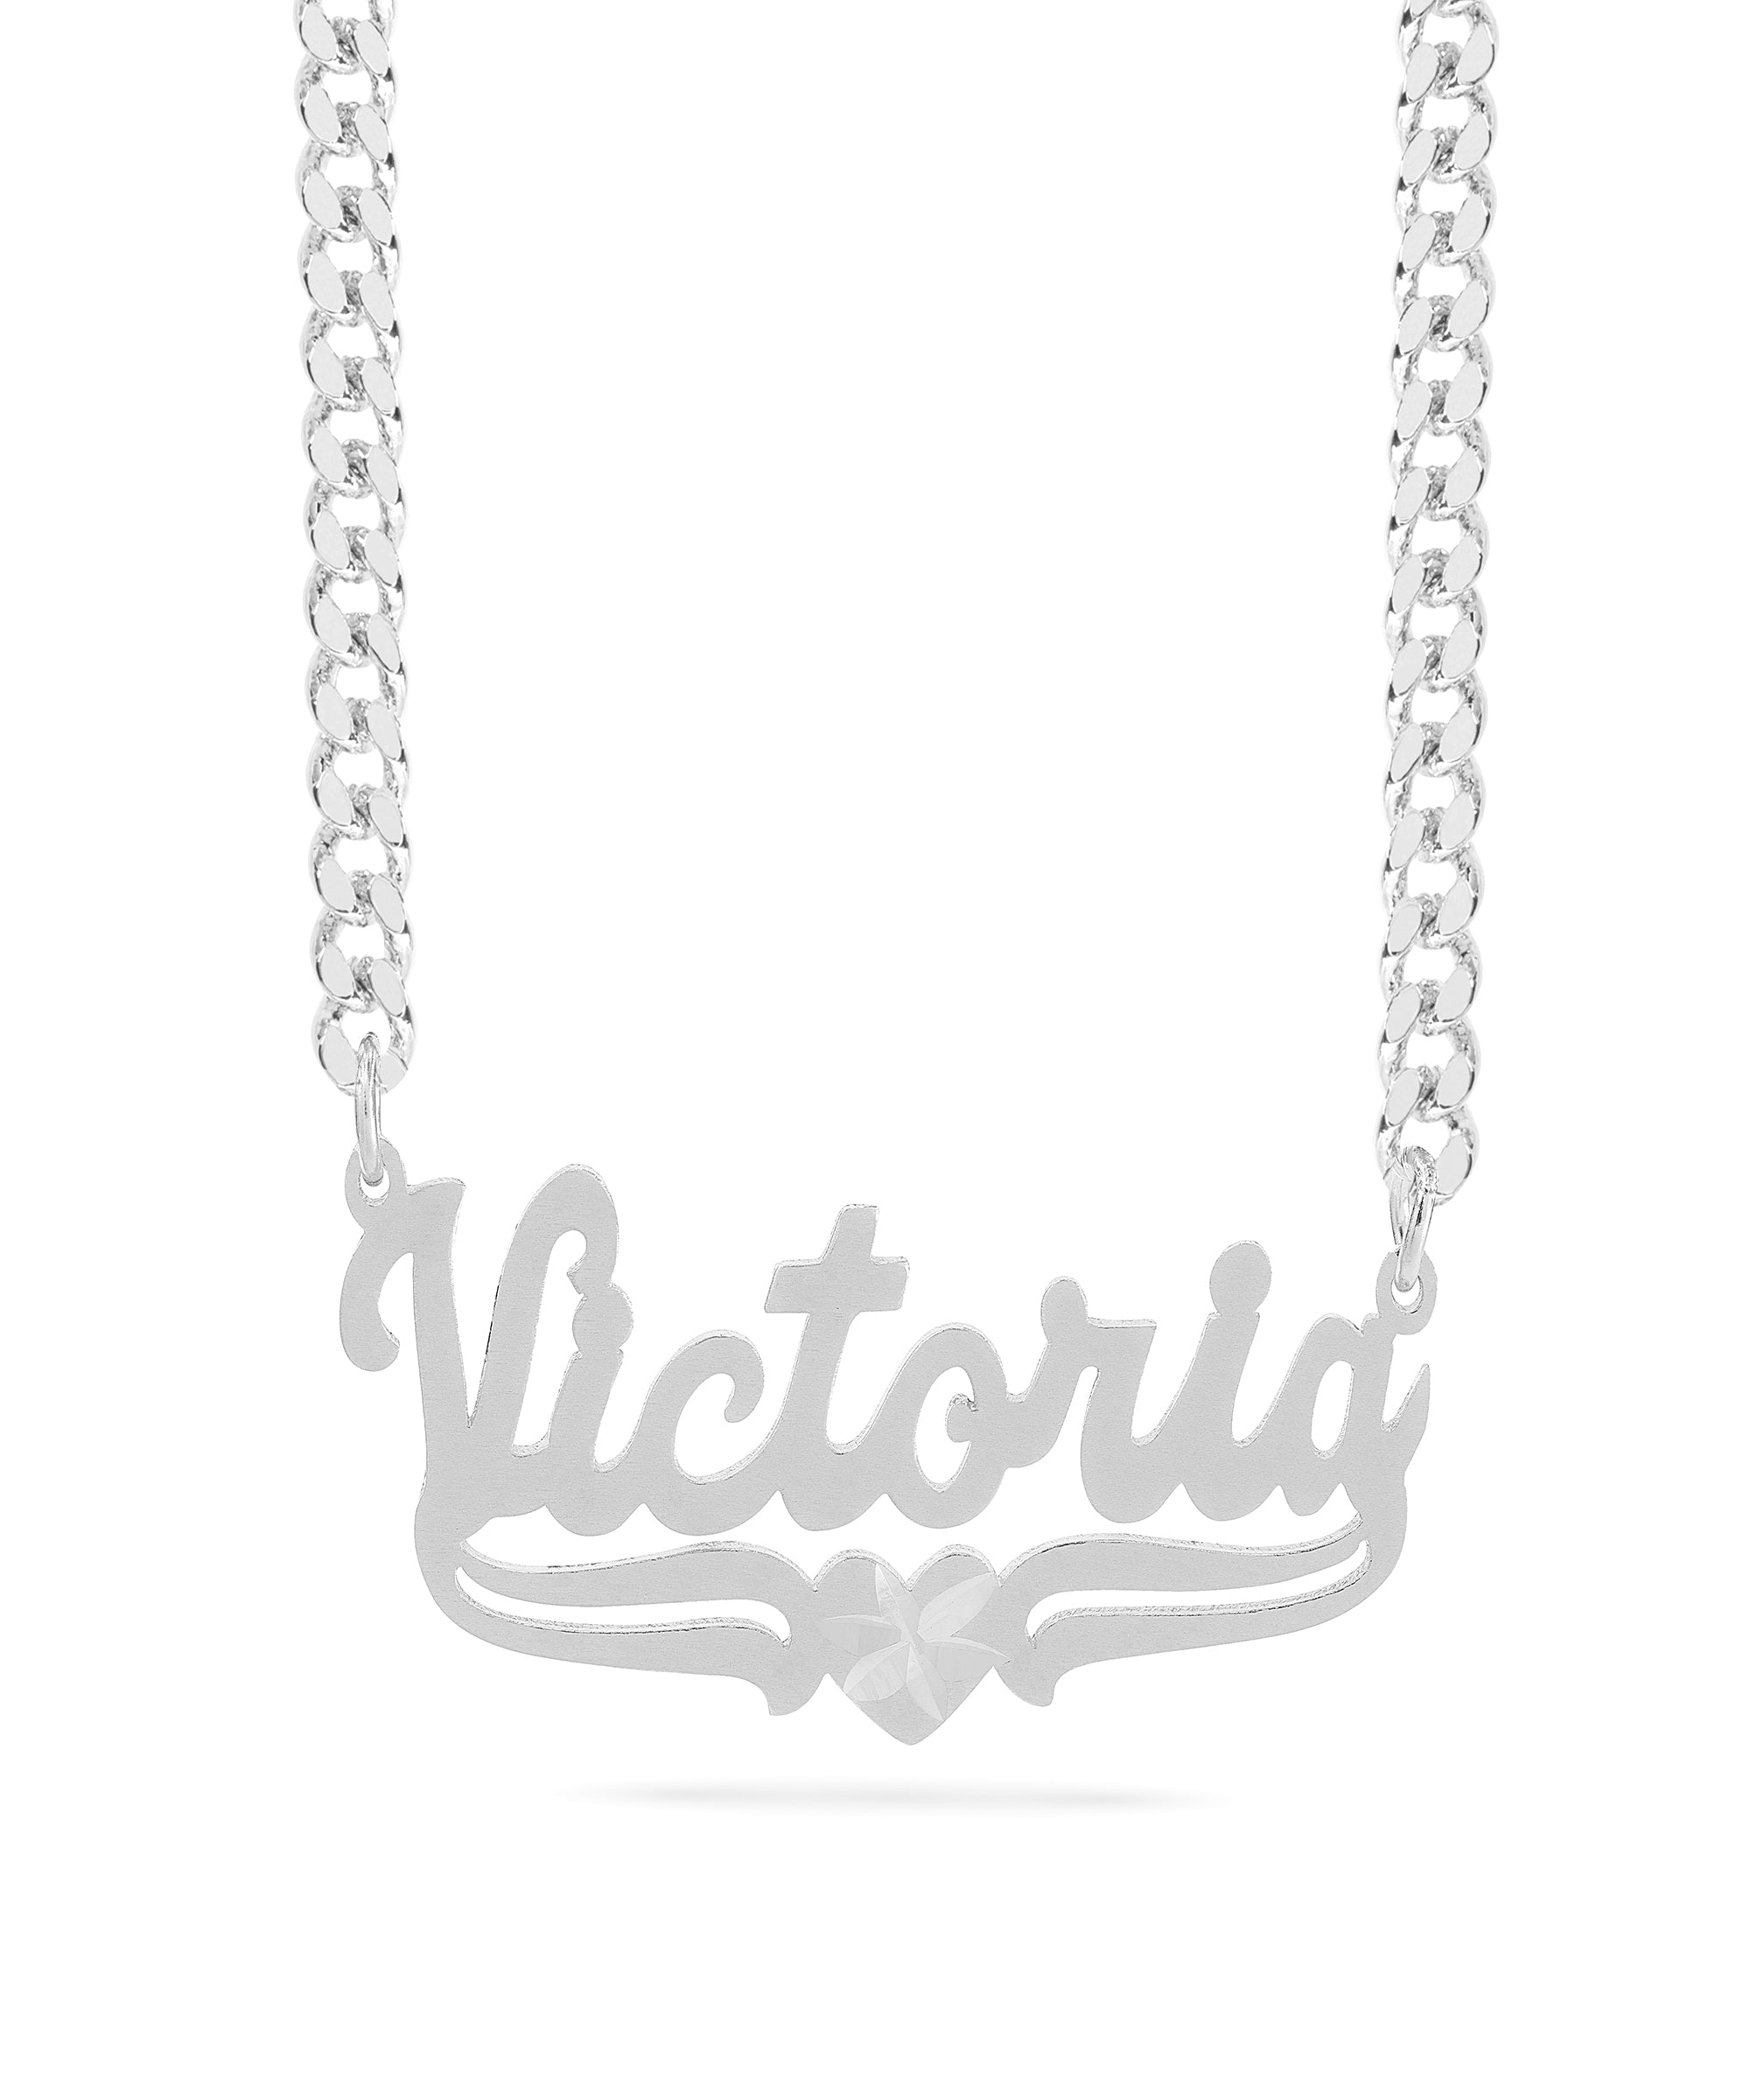 Personalized Name necklace with Satin and Heart "Victoria"